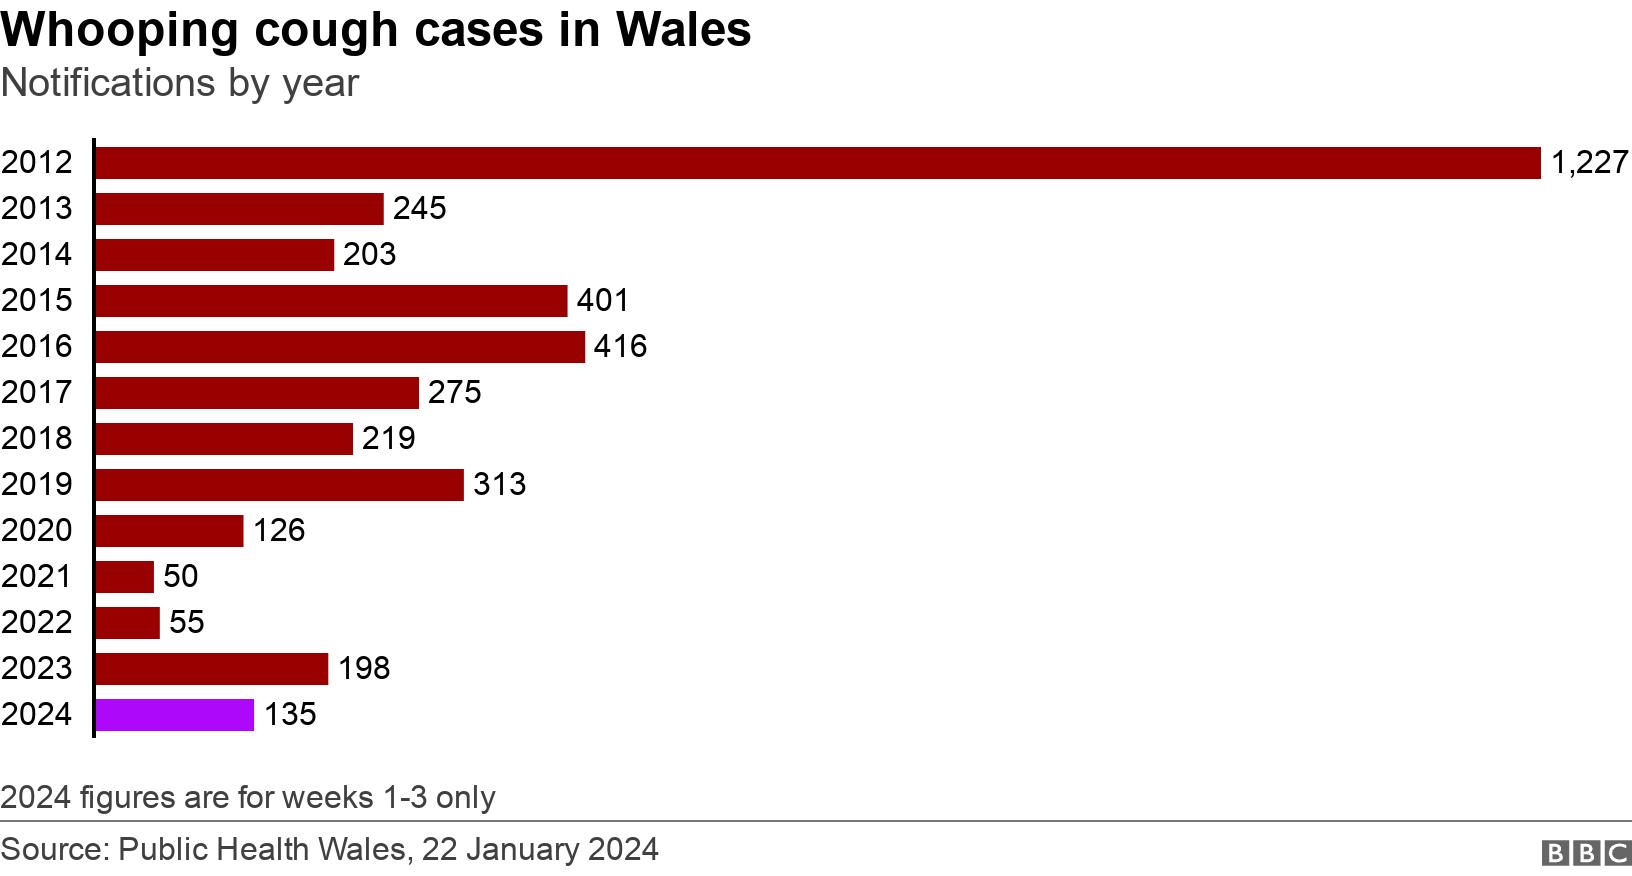 Whooping cough cases in Wales. Notifications by year.  2024 figures are for weeks 1-3 only.